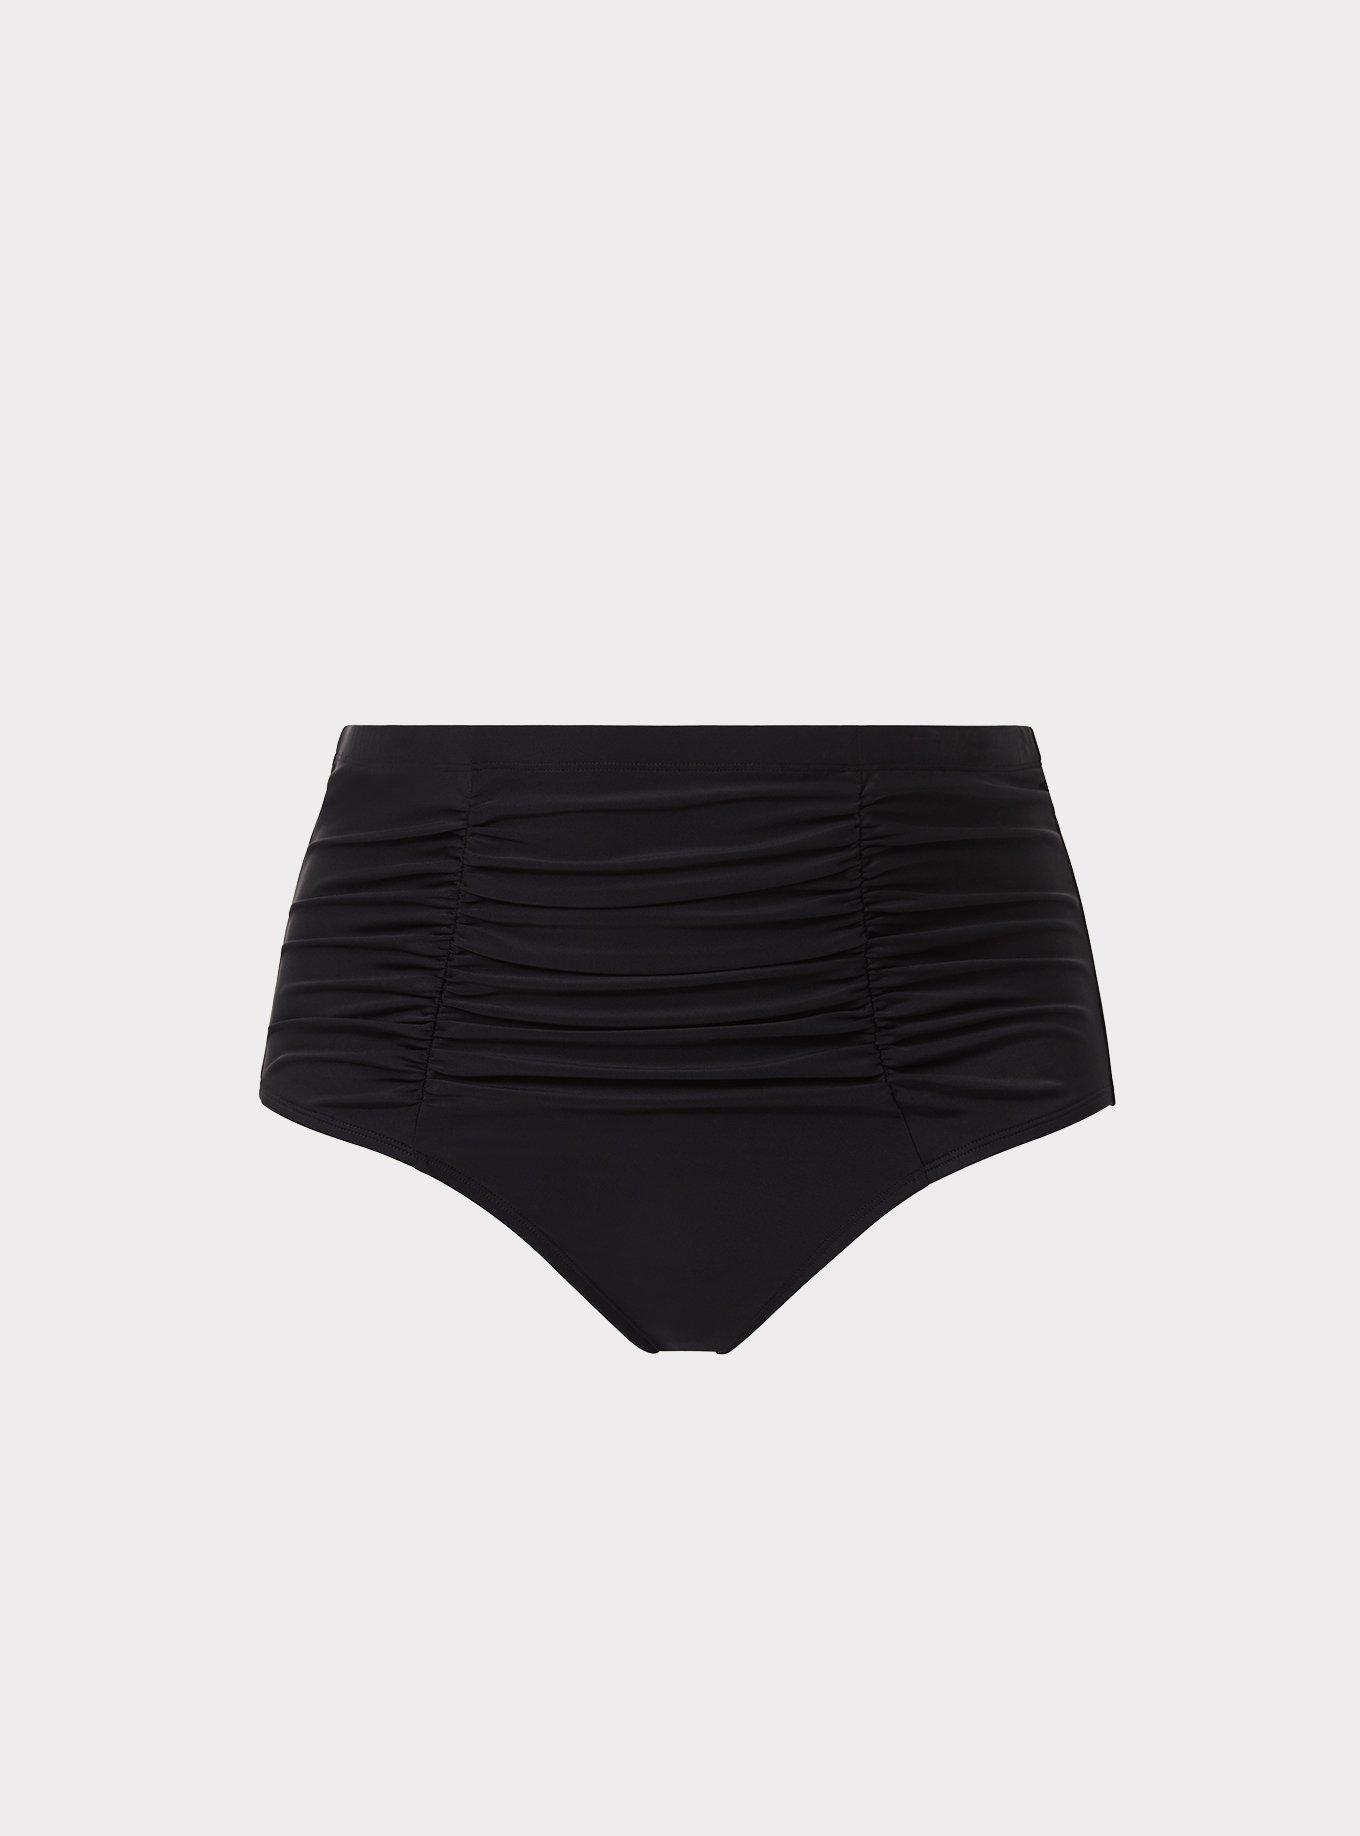 Black Ultra High Waisted Swim BOTTOMS *Plus Size Included *Final Sale*